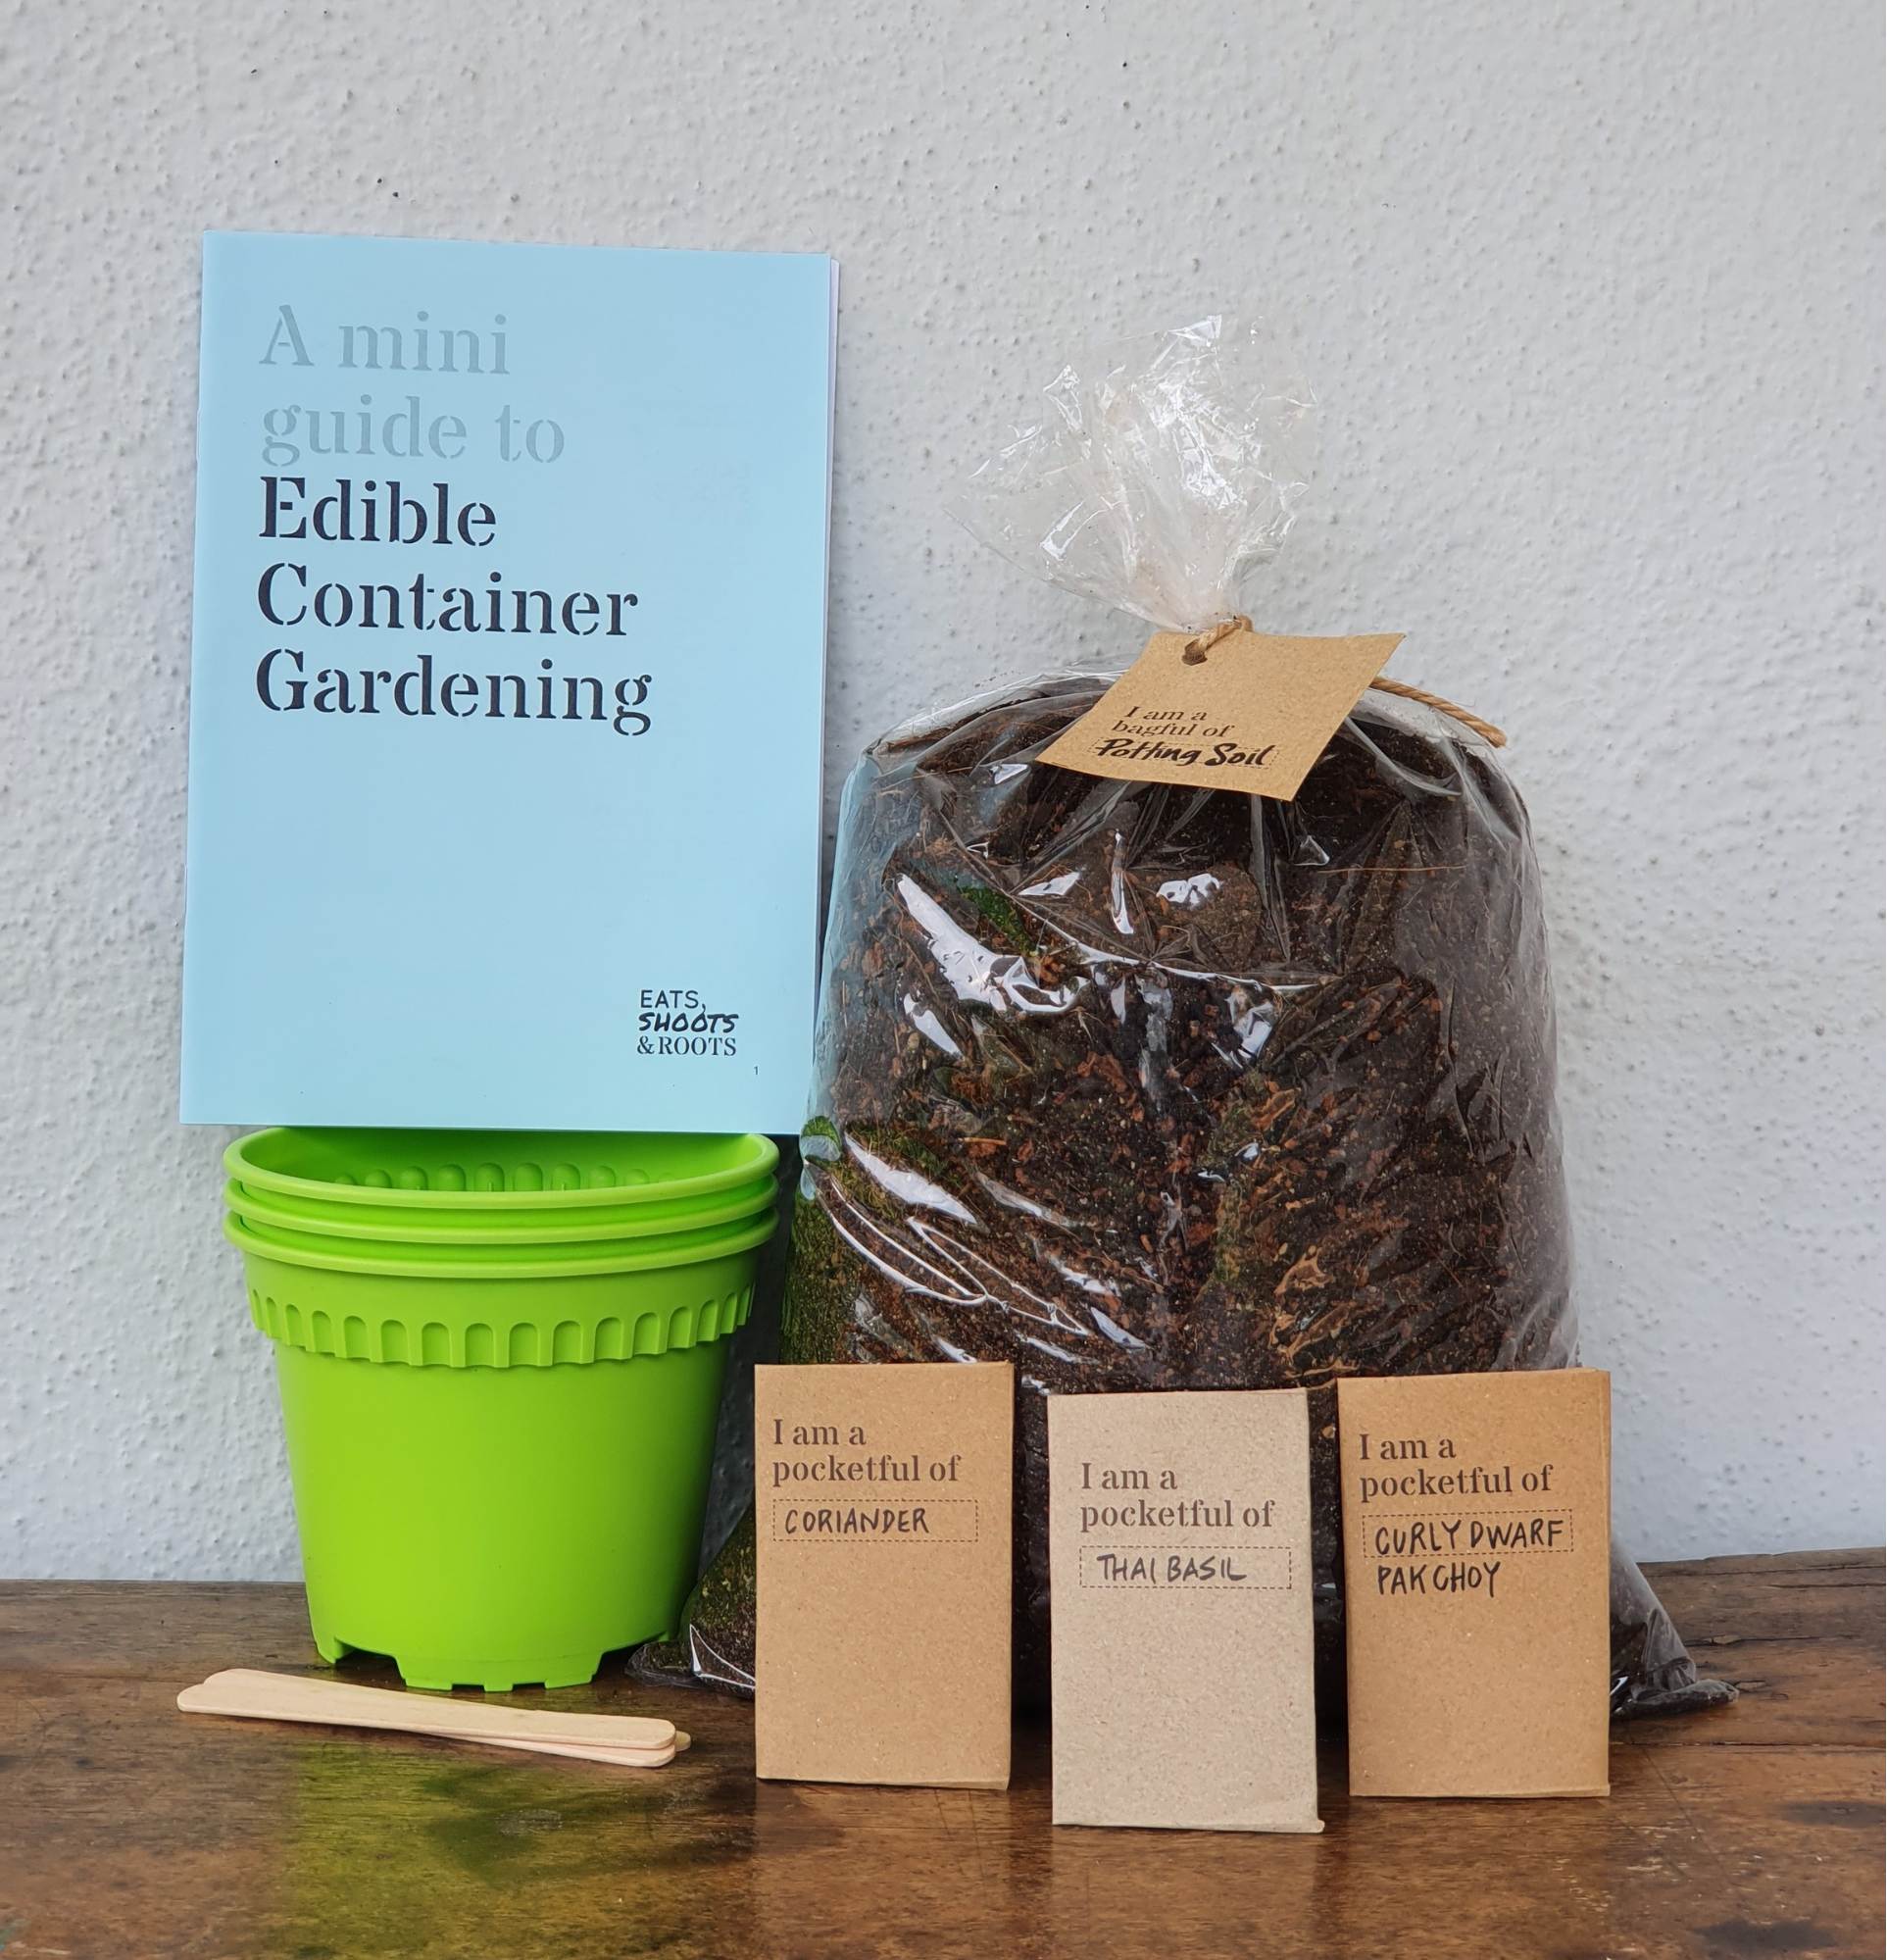 Christmas Gifts Ideas - Eat, Shoots and Roots plant 